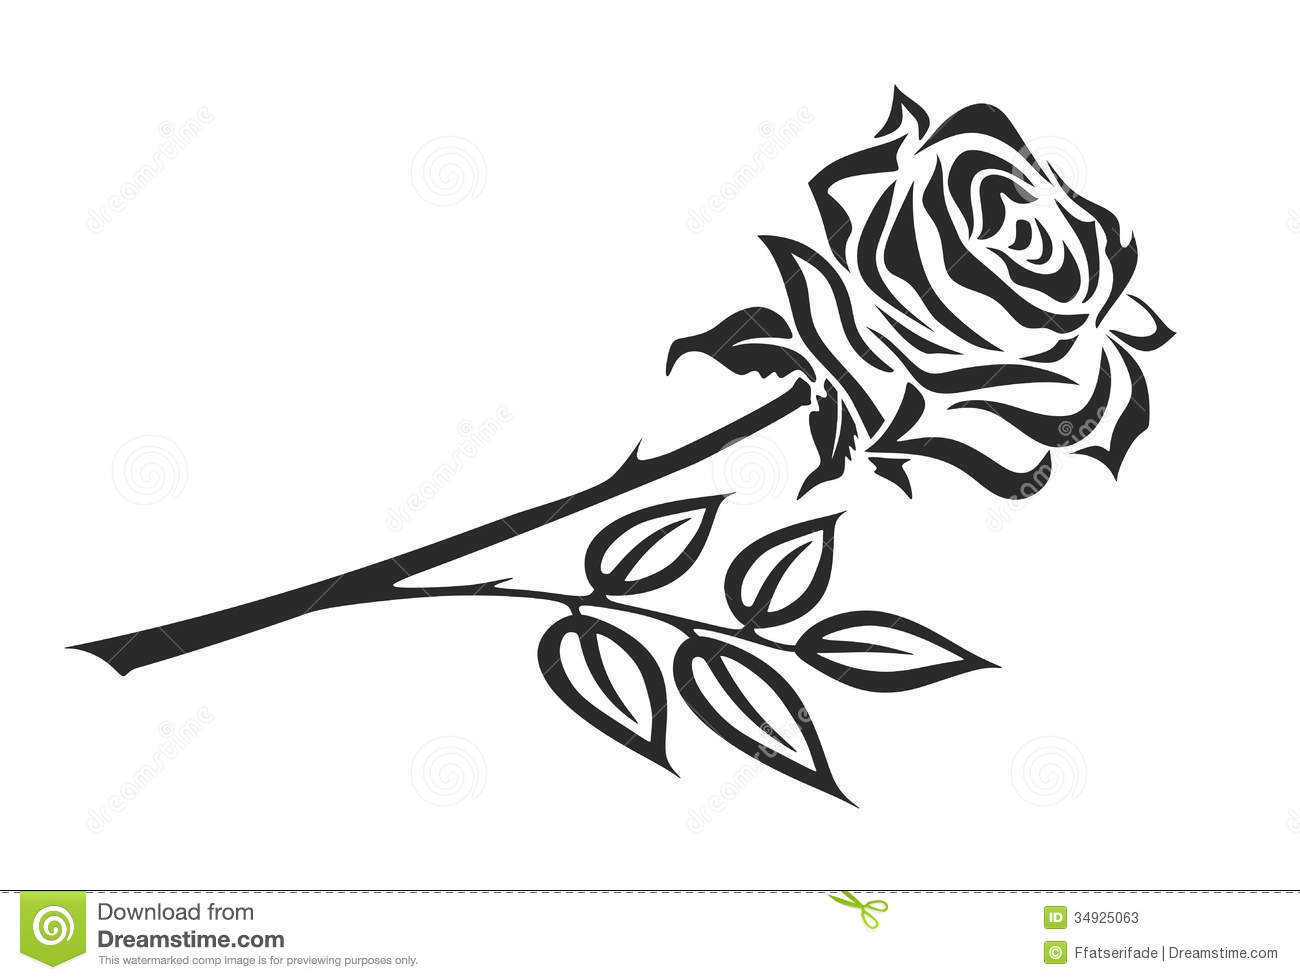 Rose cliparty on google image